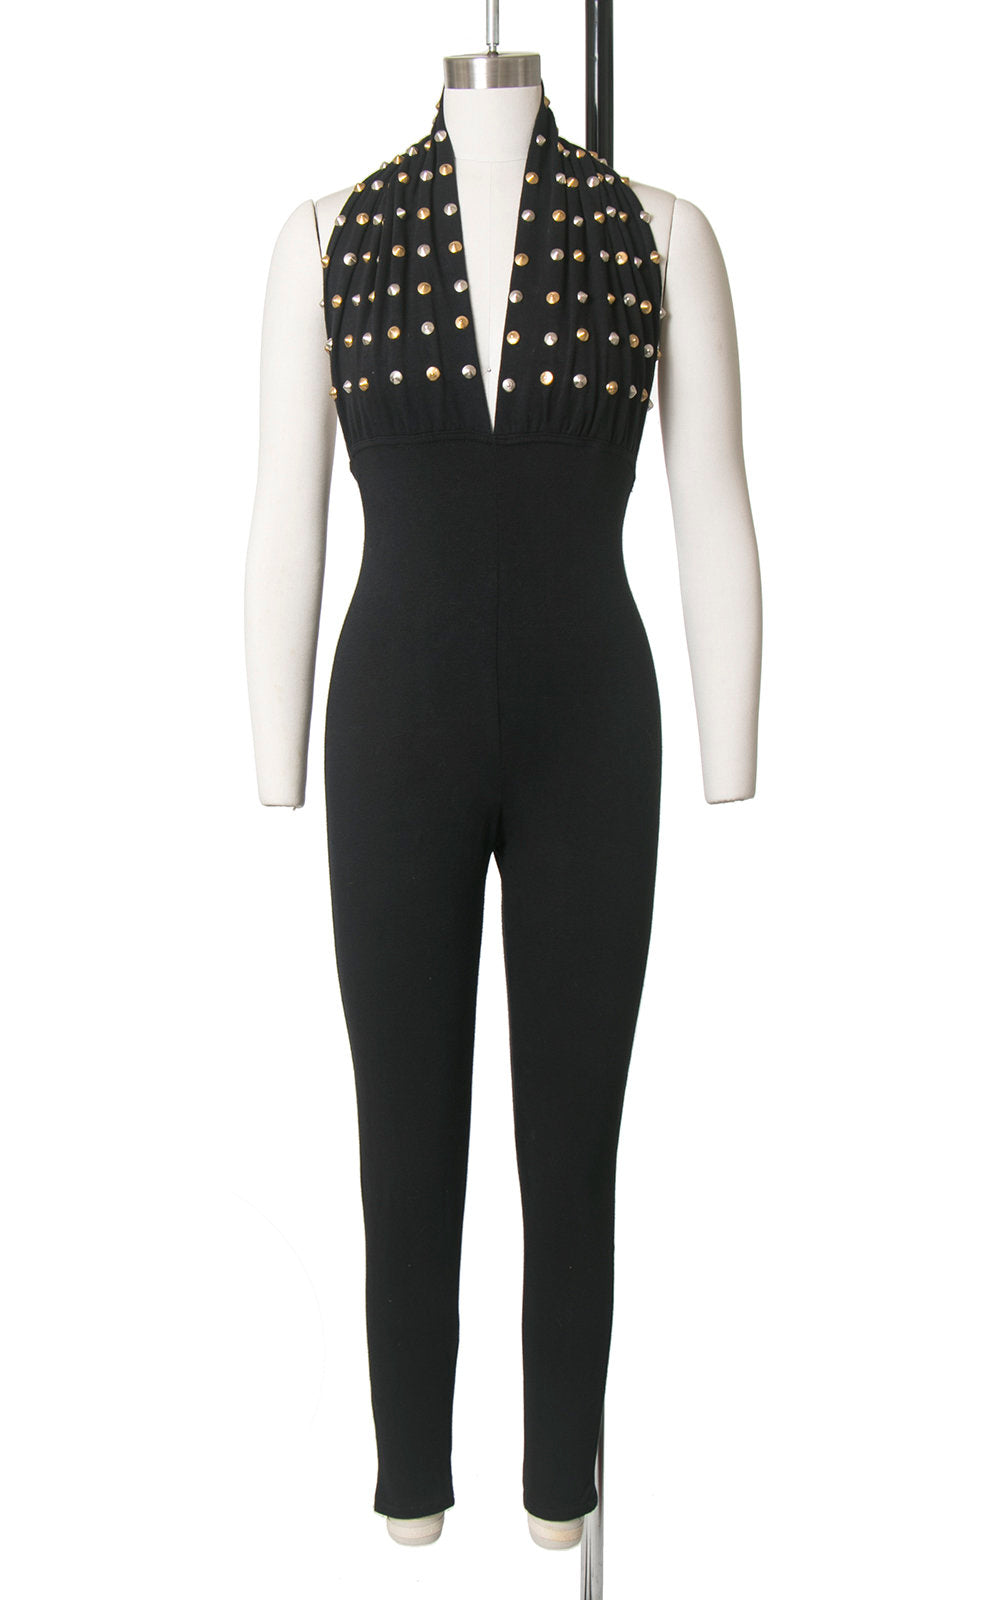 Vintage 1980s Jumpsuit | 80s Metal Studded Halter Black Stretchy Bodycon Open Back Catsuit (x-small/small)